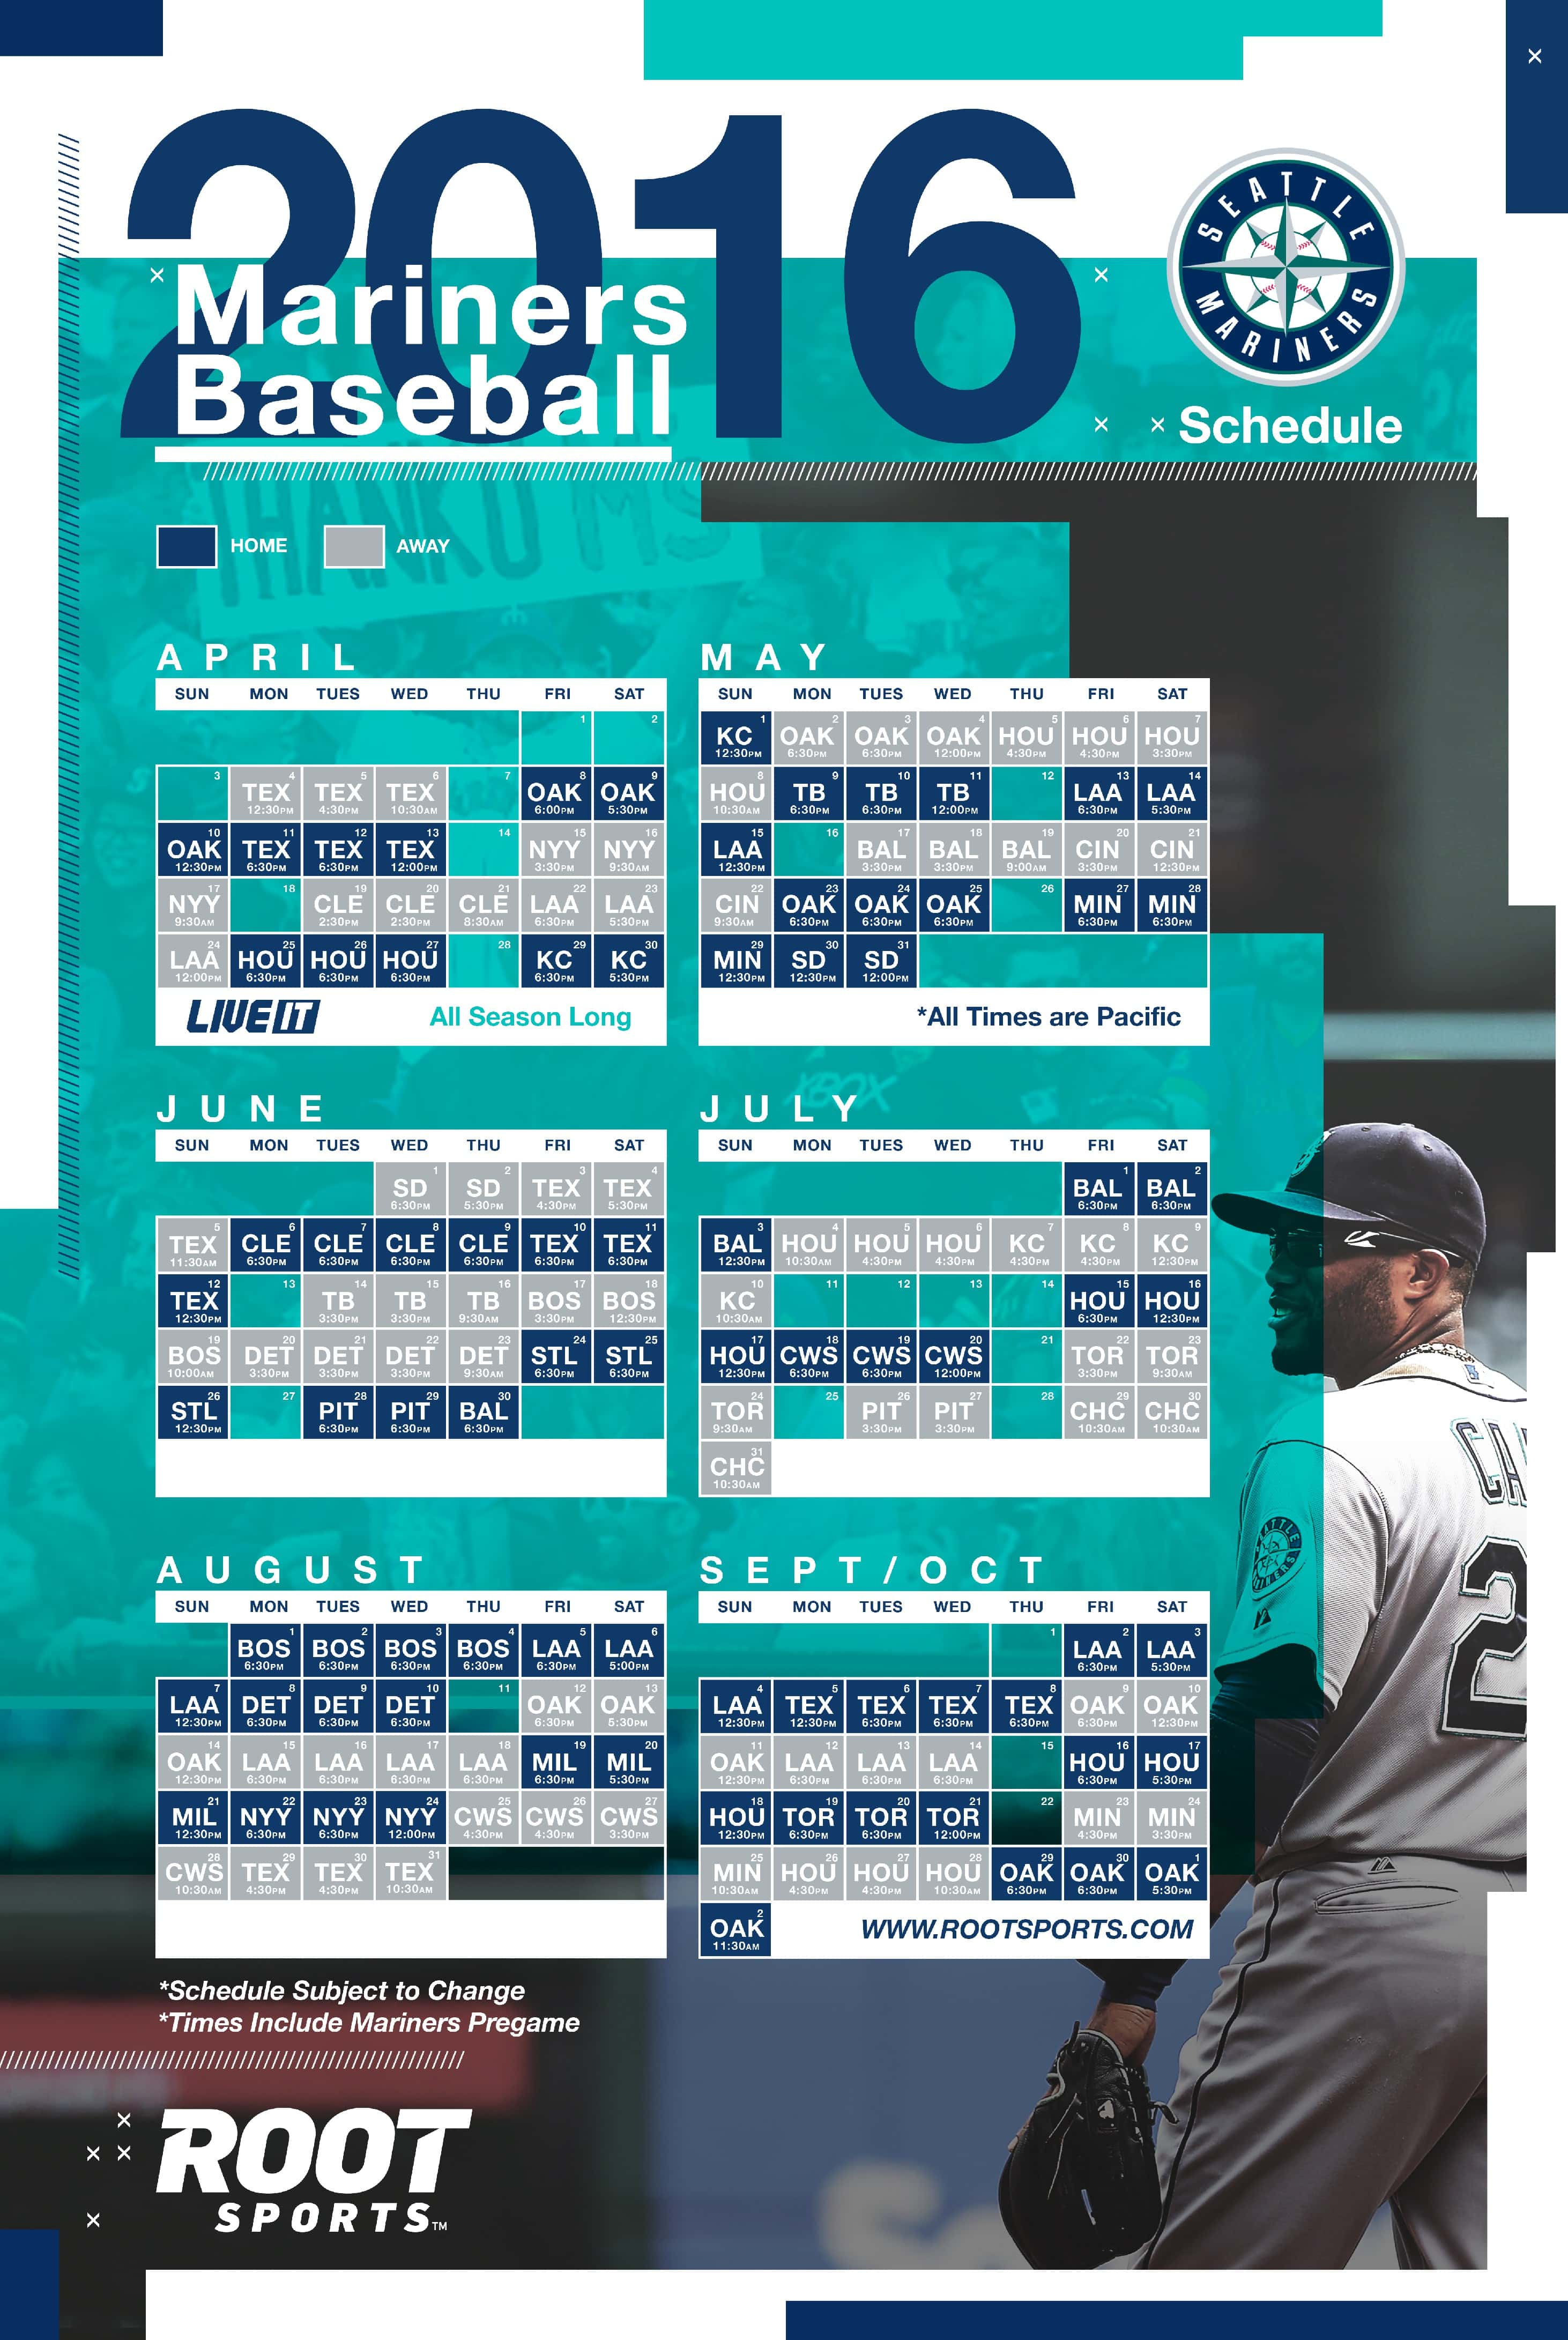 2016_Mariners Schedule ROOT SPORTS